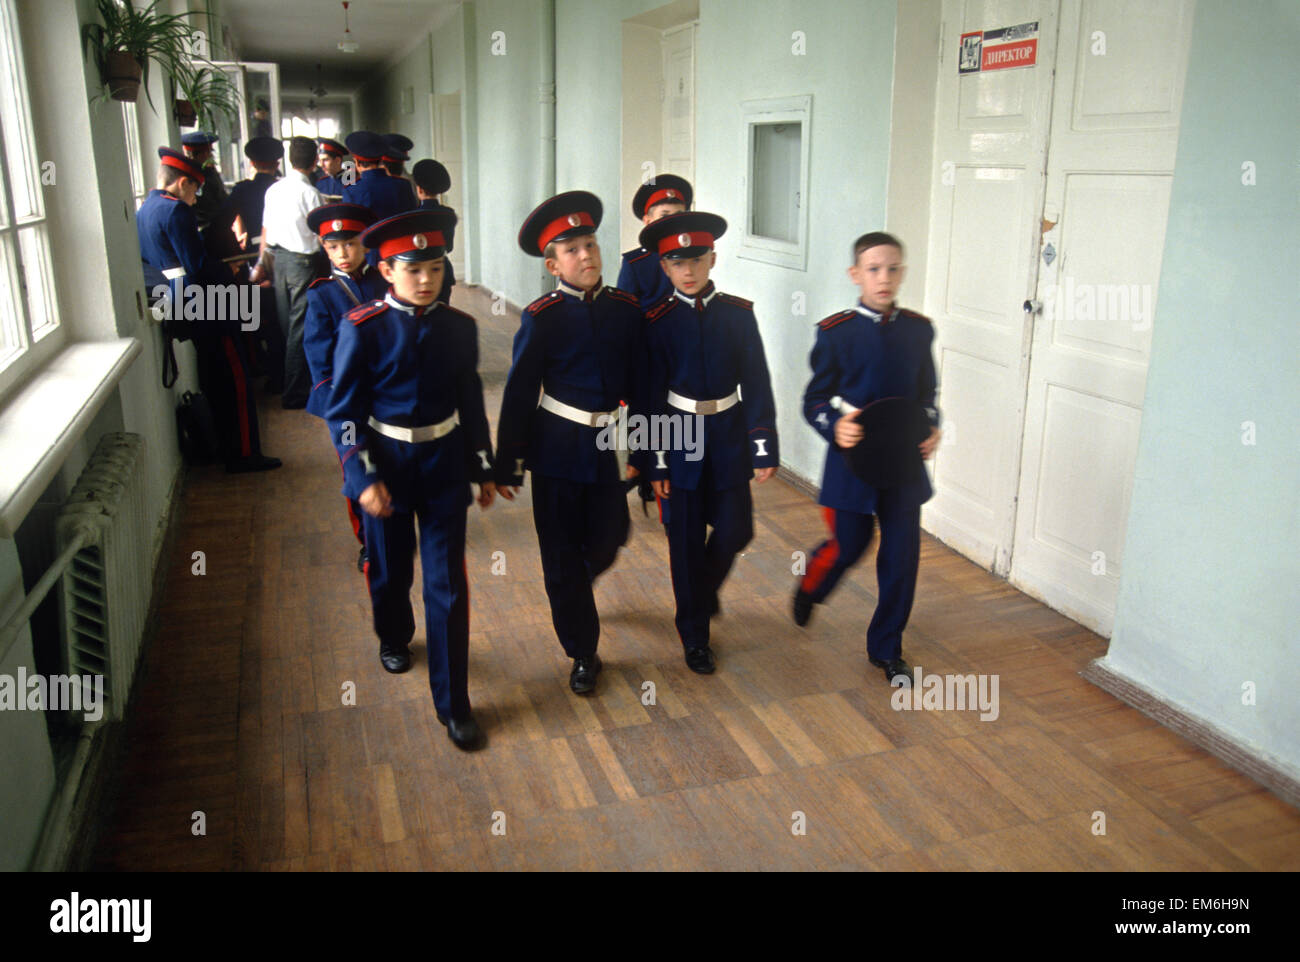 Young Russian Don Cossacks in traditional Cossack uniform walk through the halls of their school on the way to class at the Don Cossack Military School in Novocherkassk, Russia. Stock Photo